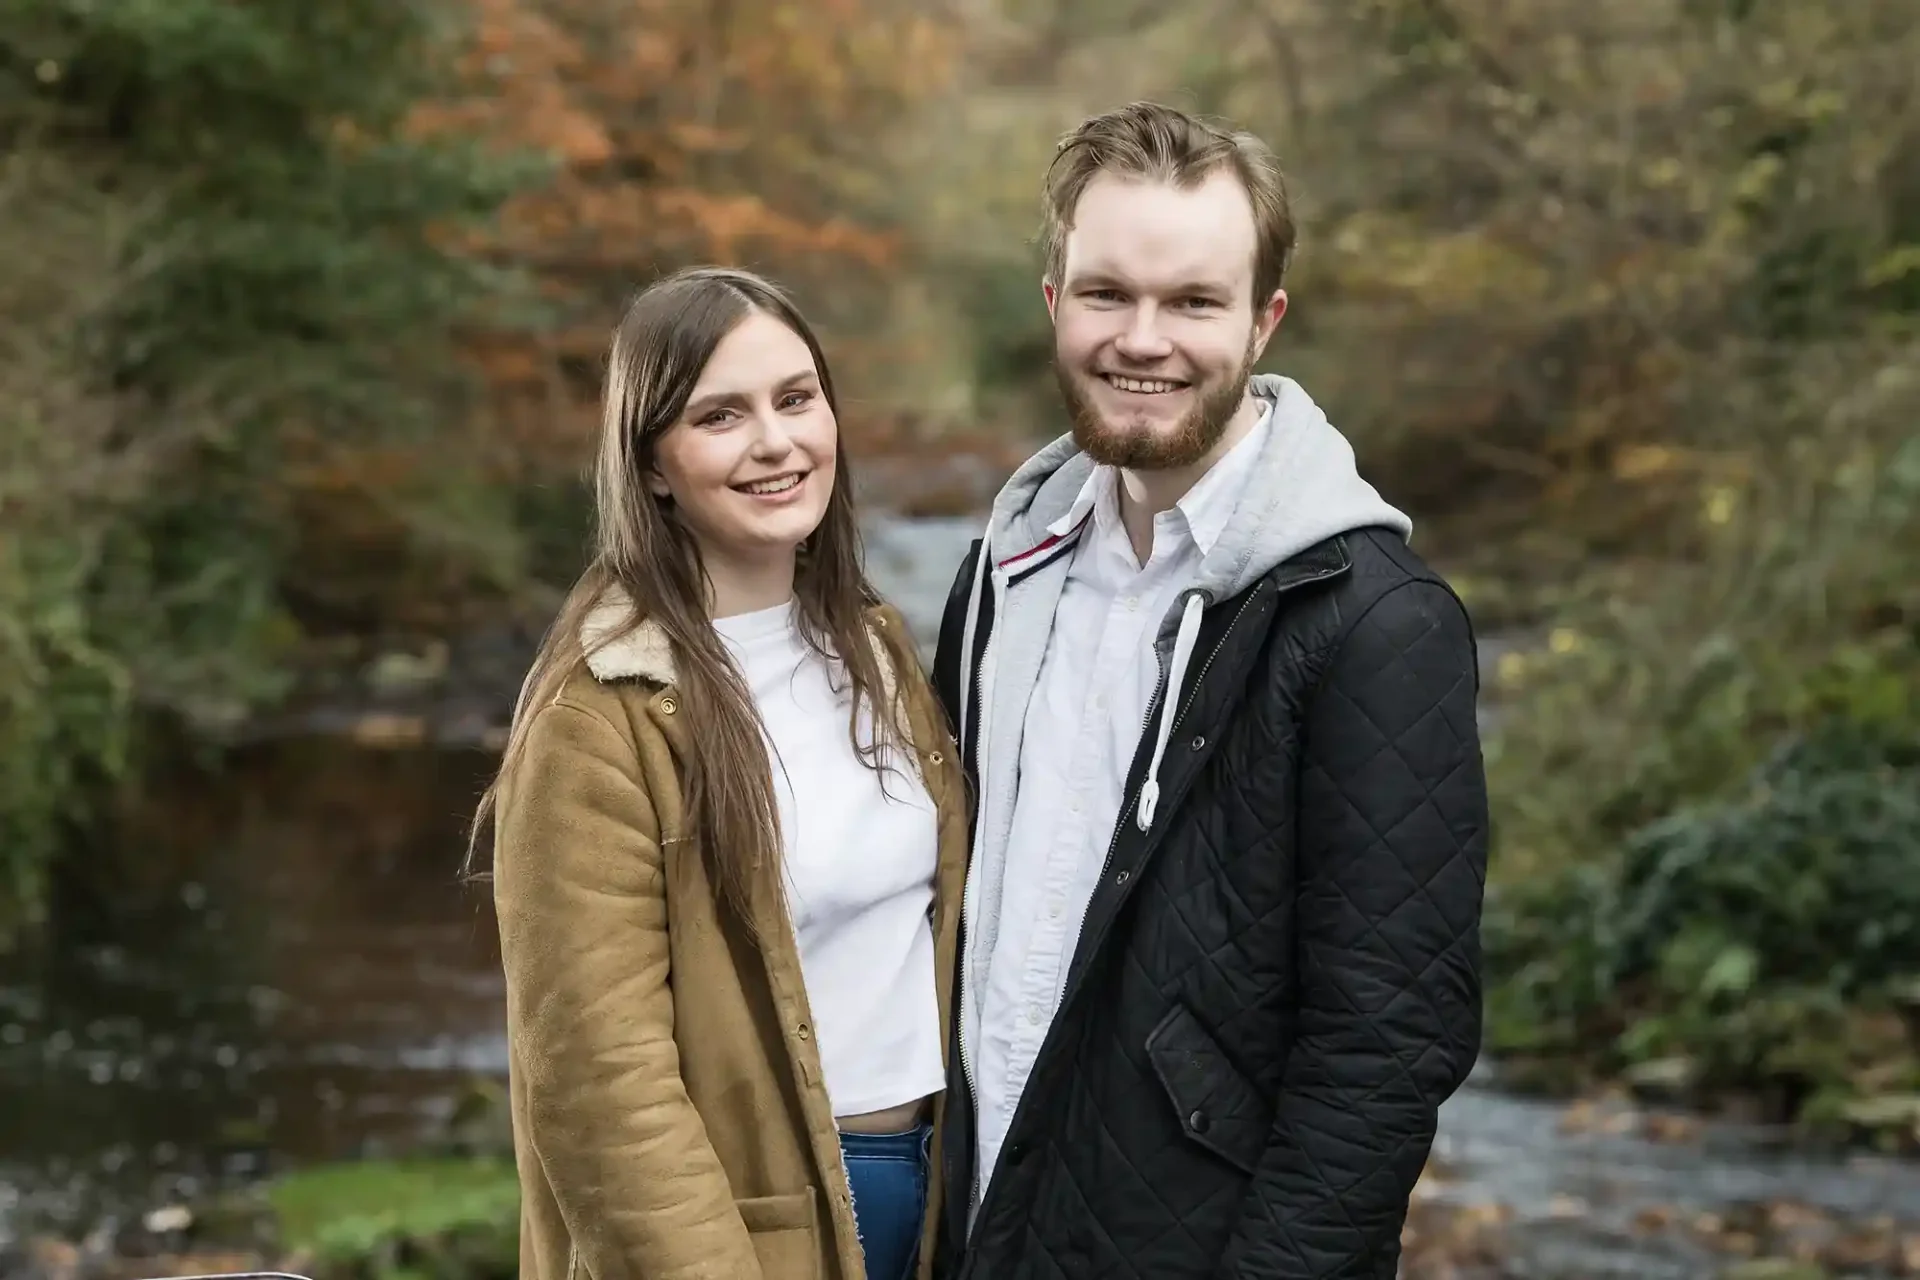 siblings at Spylaw Park with the Water Of Leith in the background